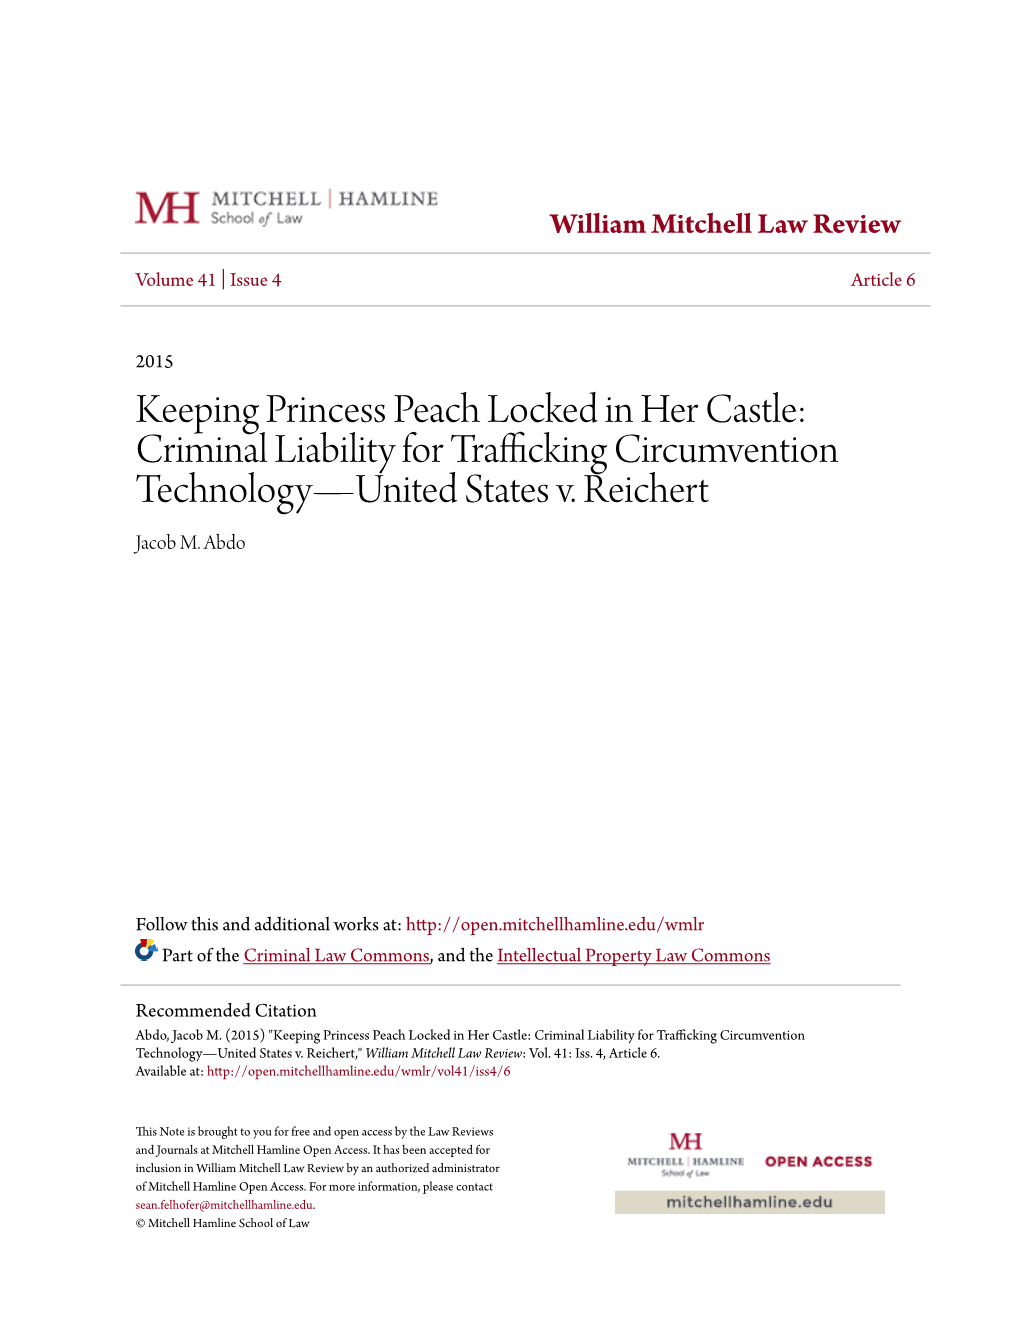 Keeping Princess Peach Locked in Her Castle: Criminal Liability for Trafficking Circumvention Technology—United States V